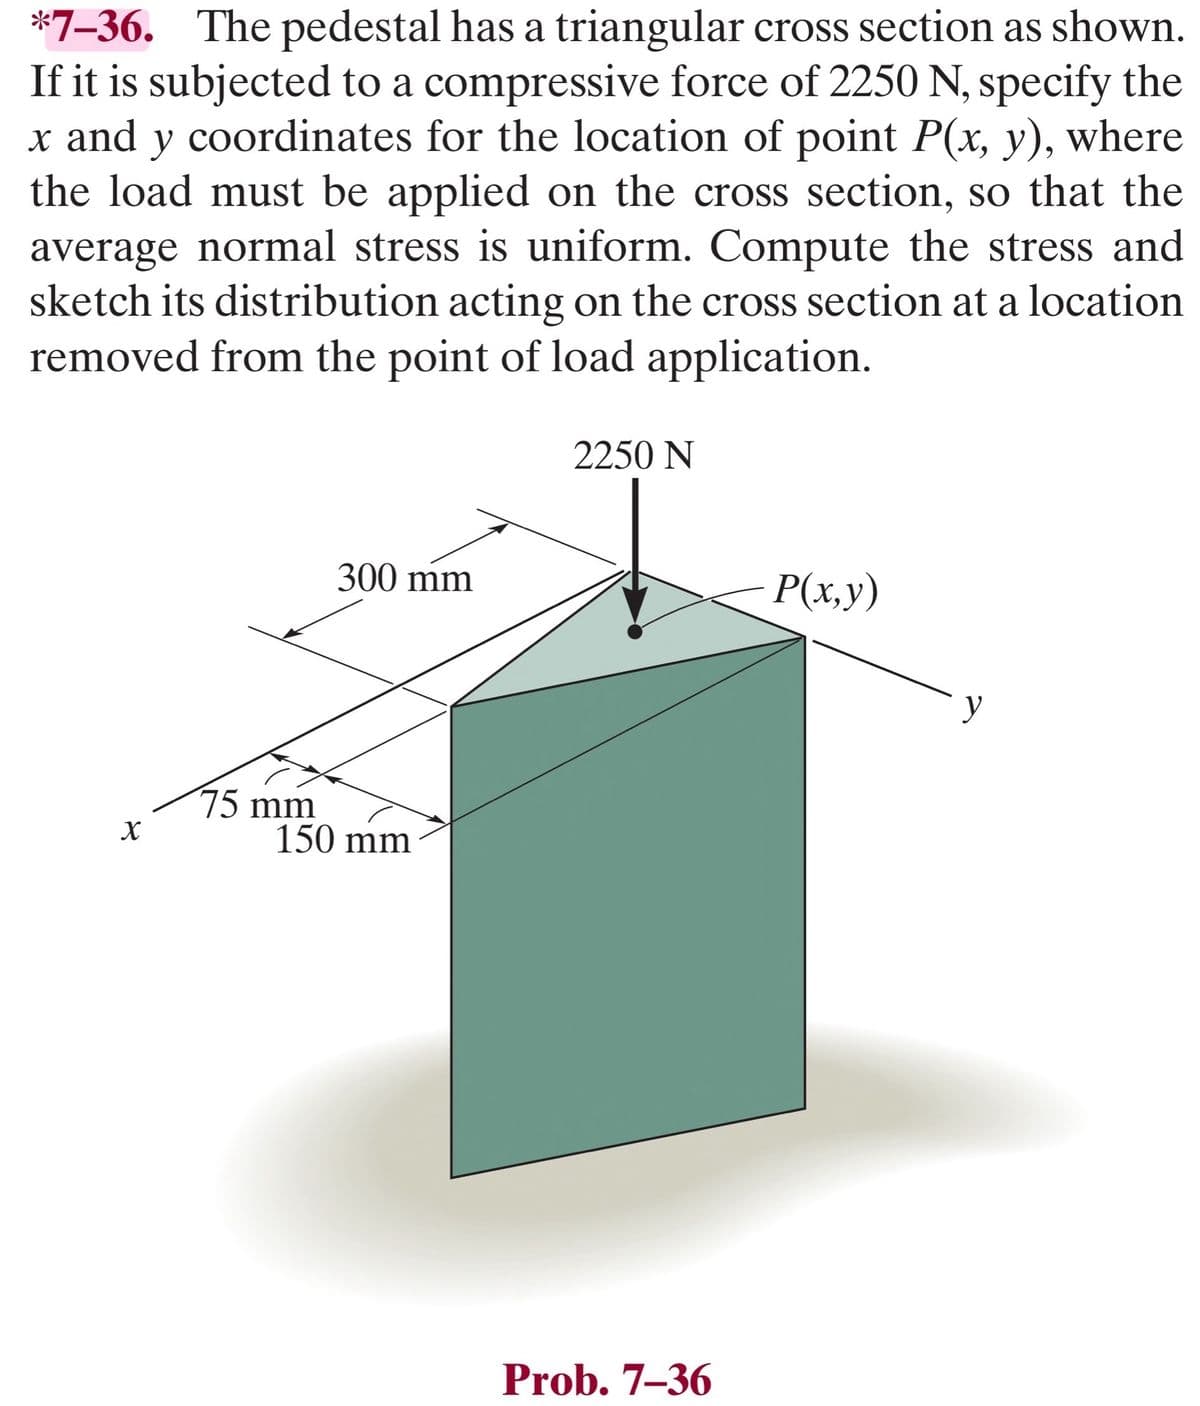 *7-36. The pedestal has a triangular cross section as shown.
If it is subjected to a compressive force of 2250 N, specify the
x and y coordinates for the location of point P(x, y), where
the load must be applied on the cross section, so that the
average normal stress is uniform. Compute the stress and
sketch its distribution acting on the cross section at a location
removed from the point of load application.
X
75 mm
300 mm
150 mm
2250 N
Prob. 7-36
P(x,y)
y